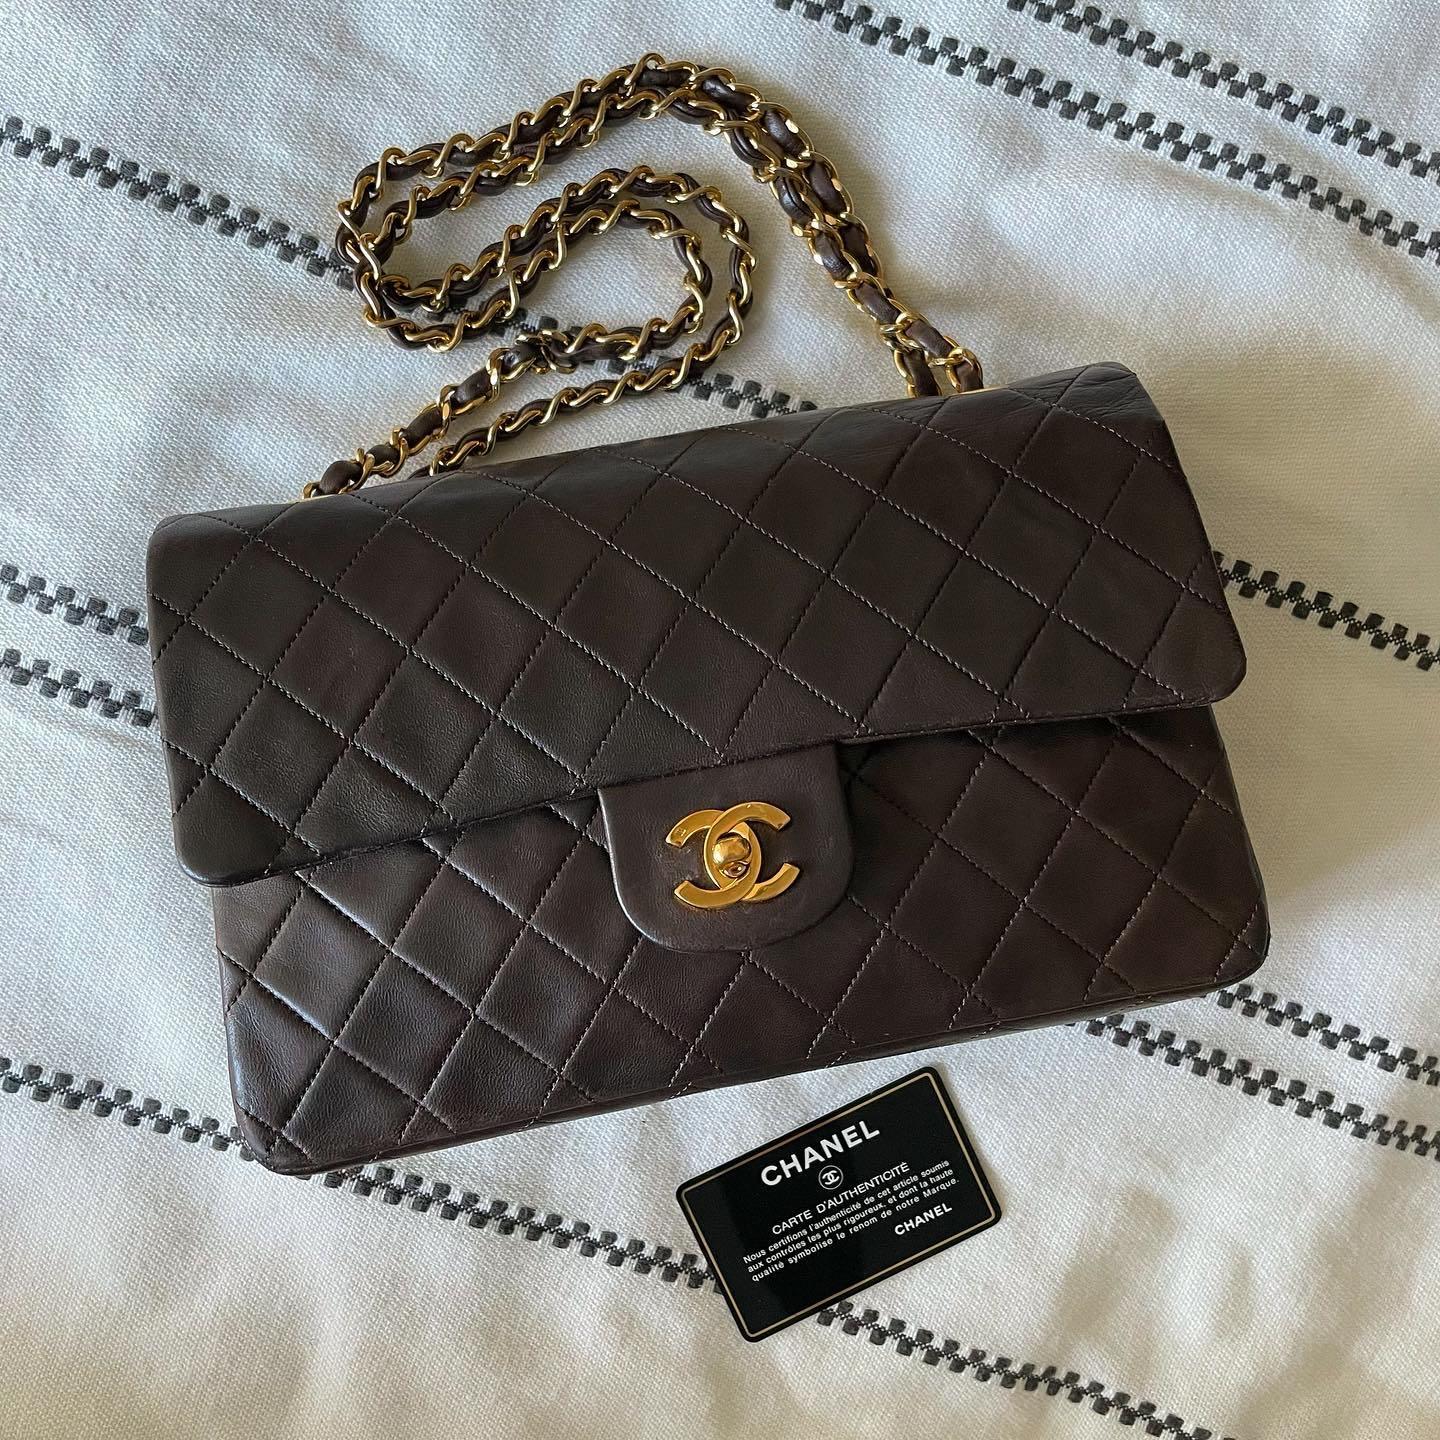 **SOLD**AUTHENTIC CHANEL Brown Caramel Medium 10 Classic Flap Bag 24k Gold  Hardware 🤎